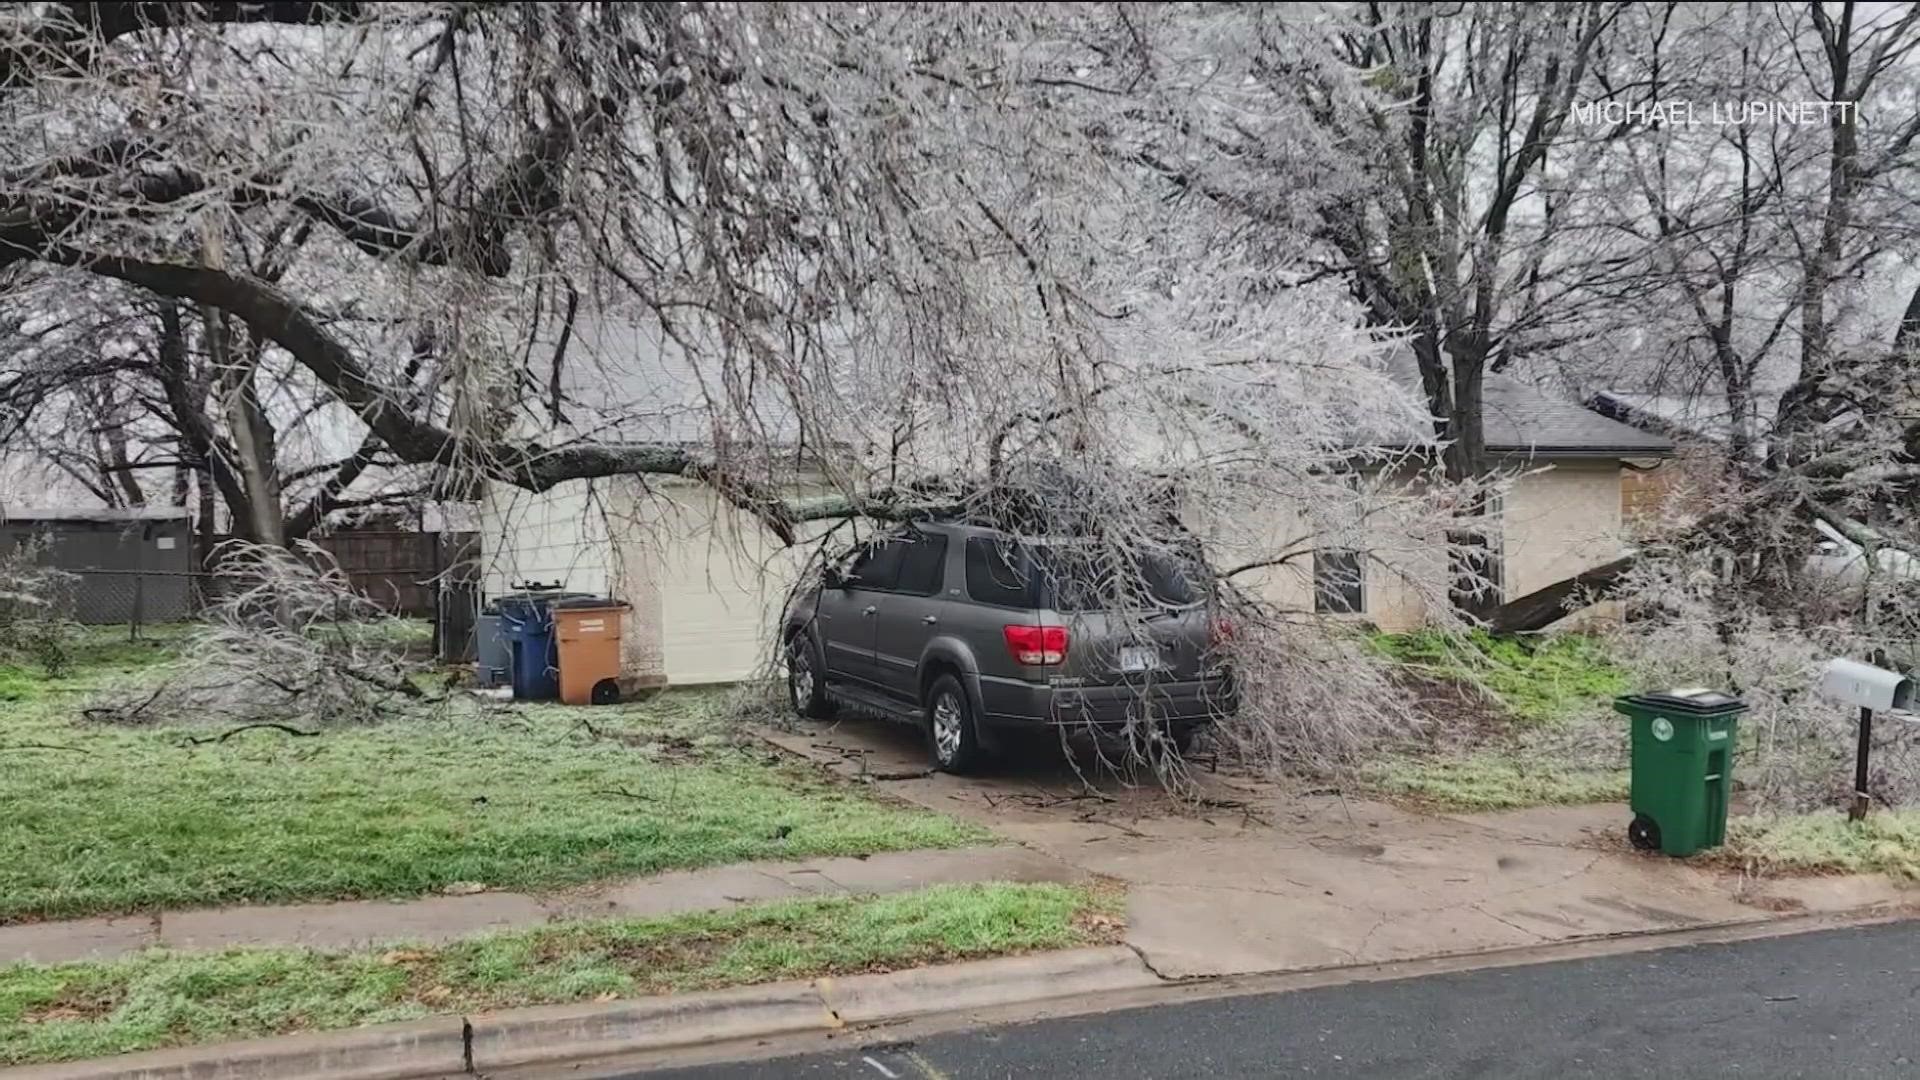 So many Central Texans are dealing with damage to their cars and homes as a result of this ice event.